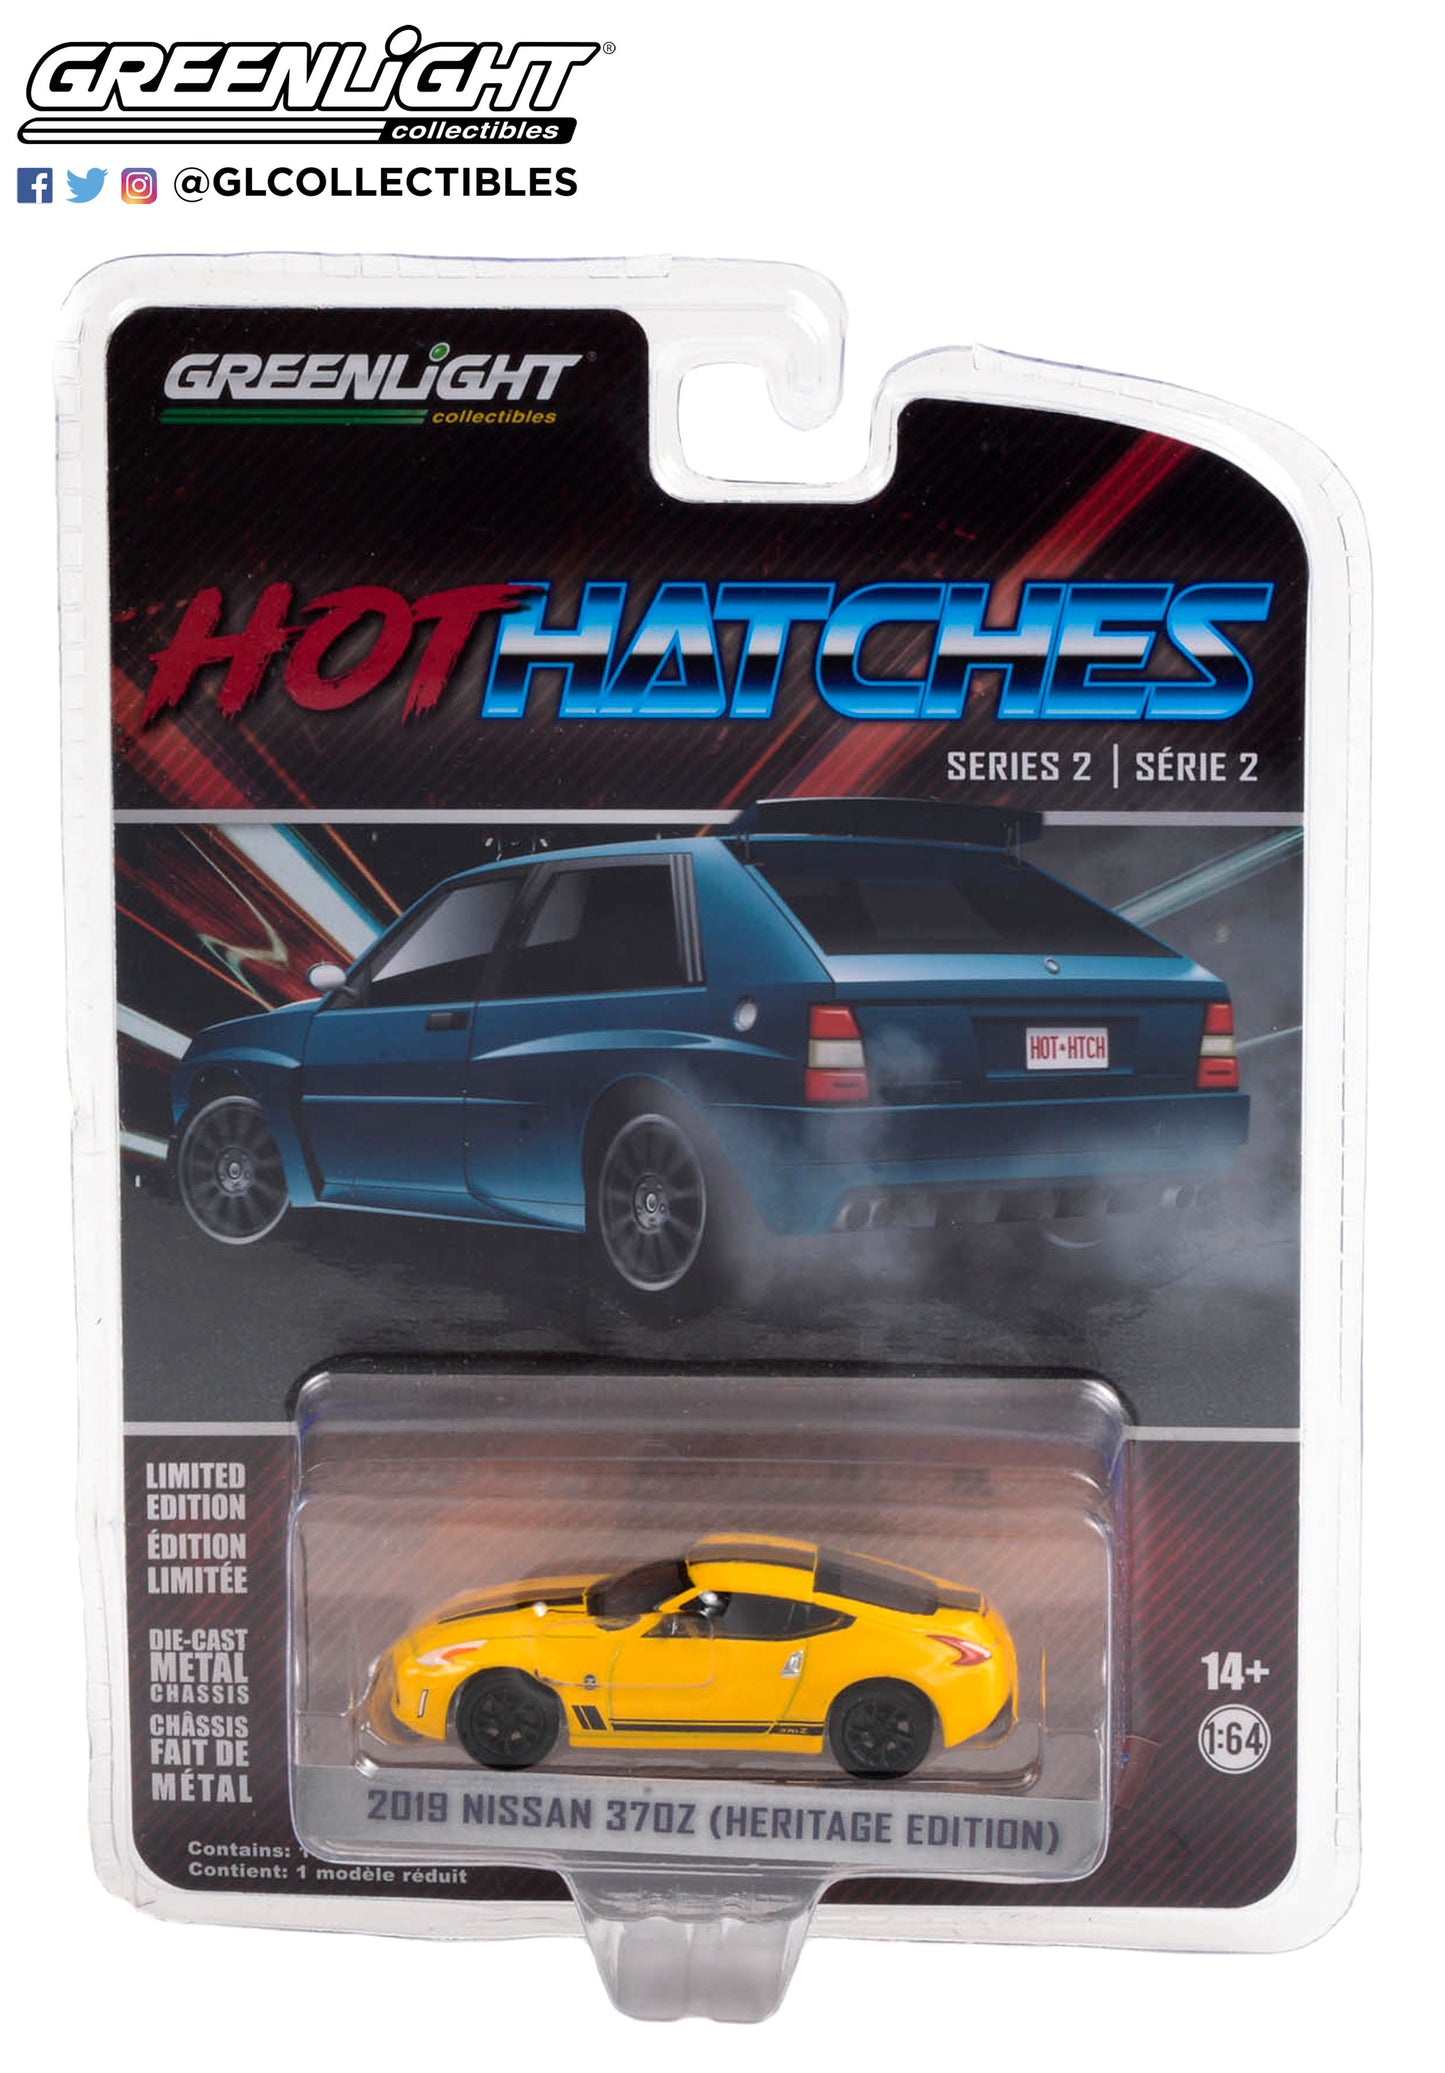 GreenLight 1:64 Hot Hatches Series 2 - 2019 Nissan 370Z - Heritage Edition - Chicane Yellow Solid Pack 63020-F